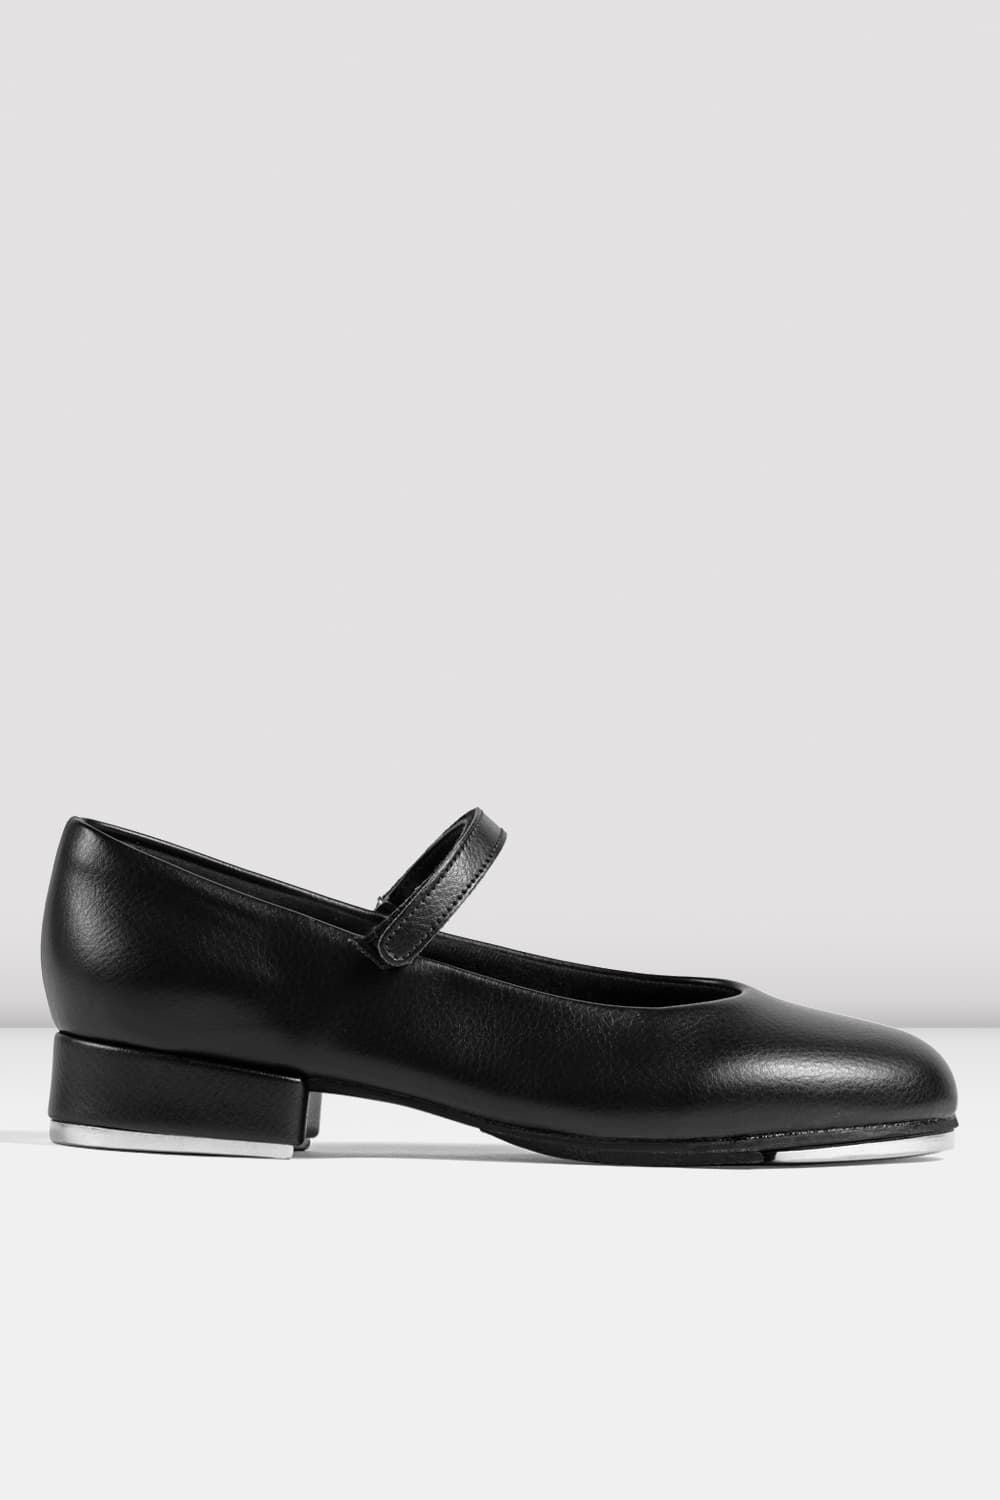 BLOCH Ladies Melody Tap Shoes, Black Synthetic Leather